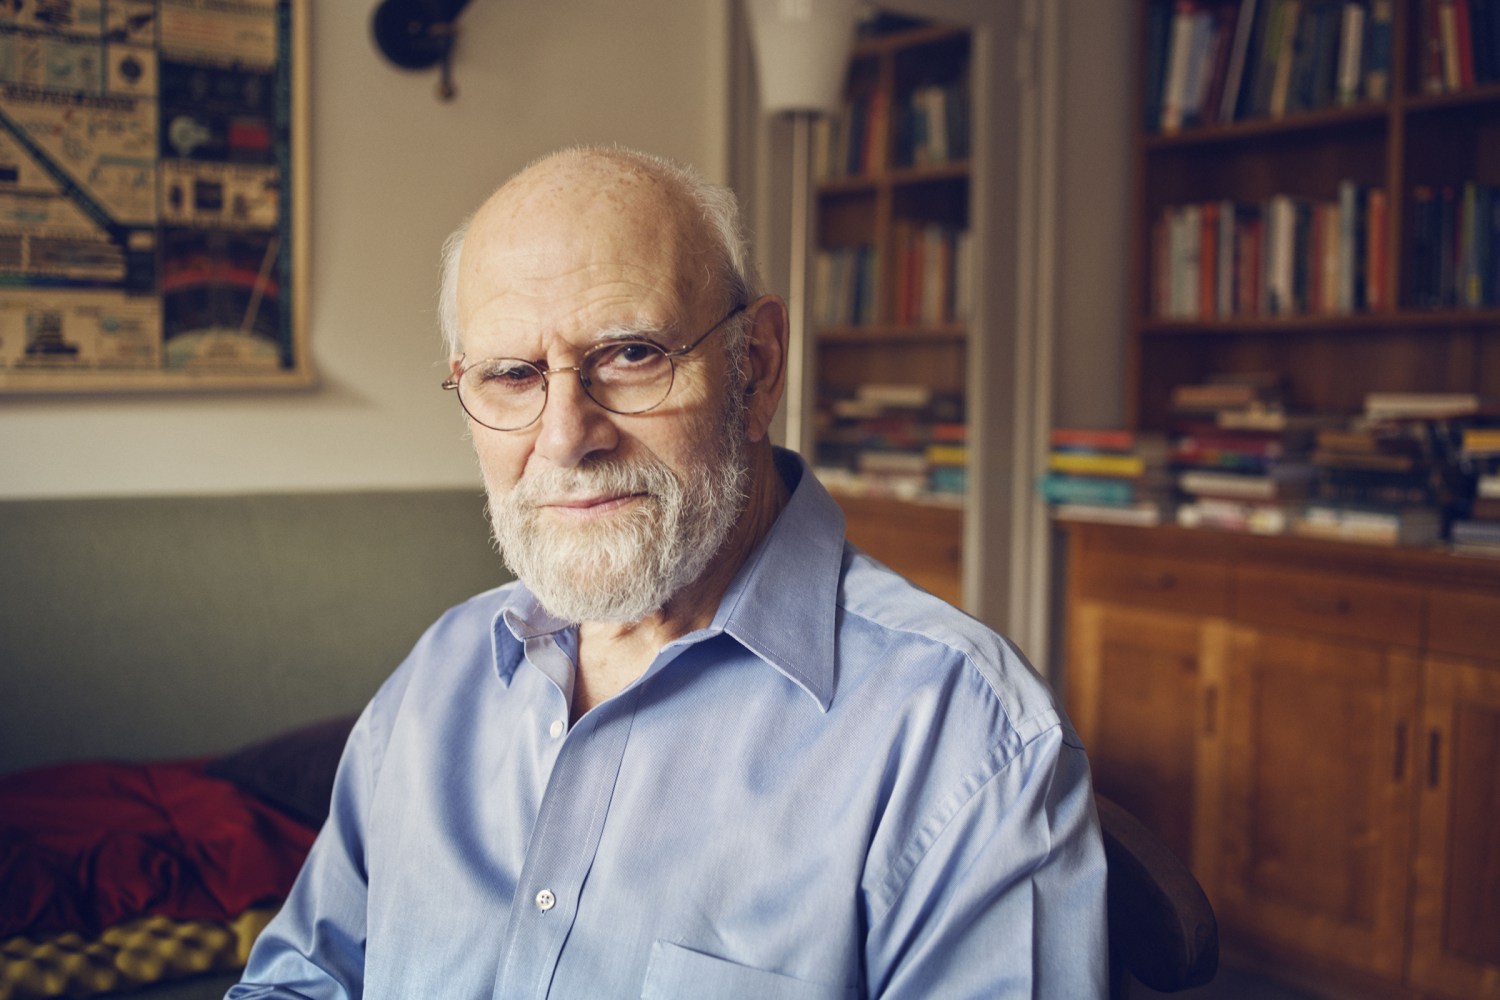 Oliver Sacks Author  Biography, Life and Books by Neurologist